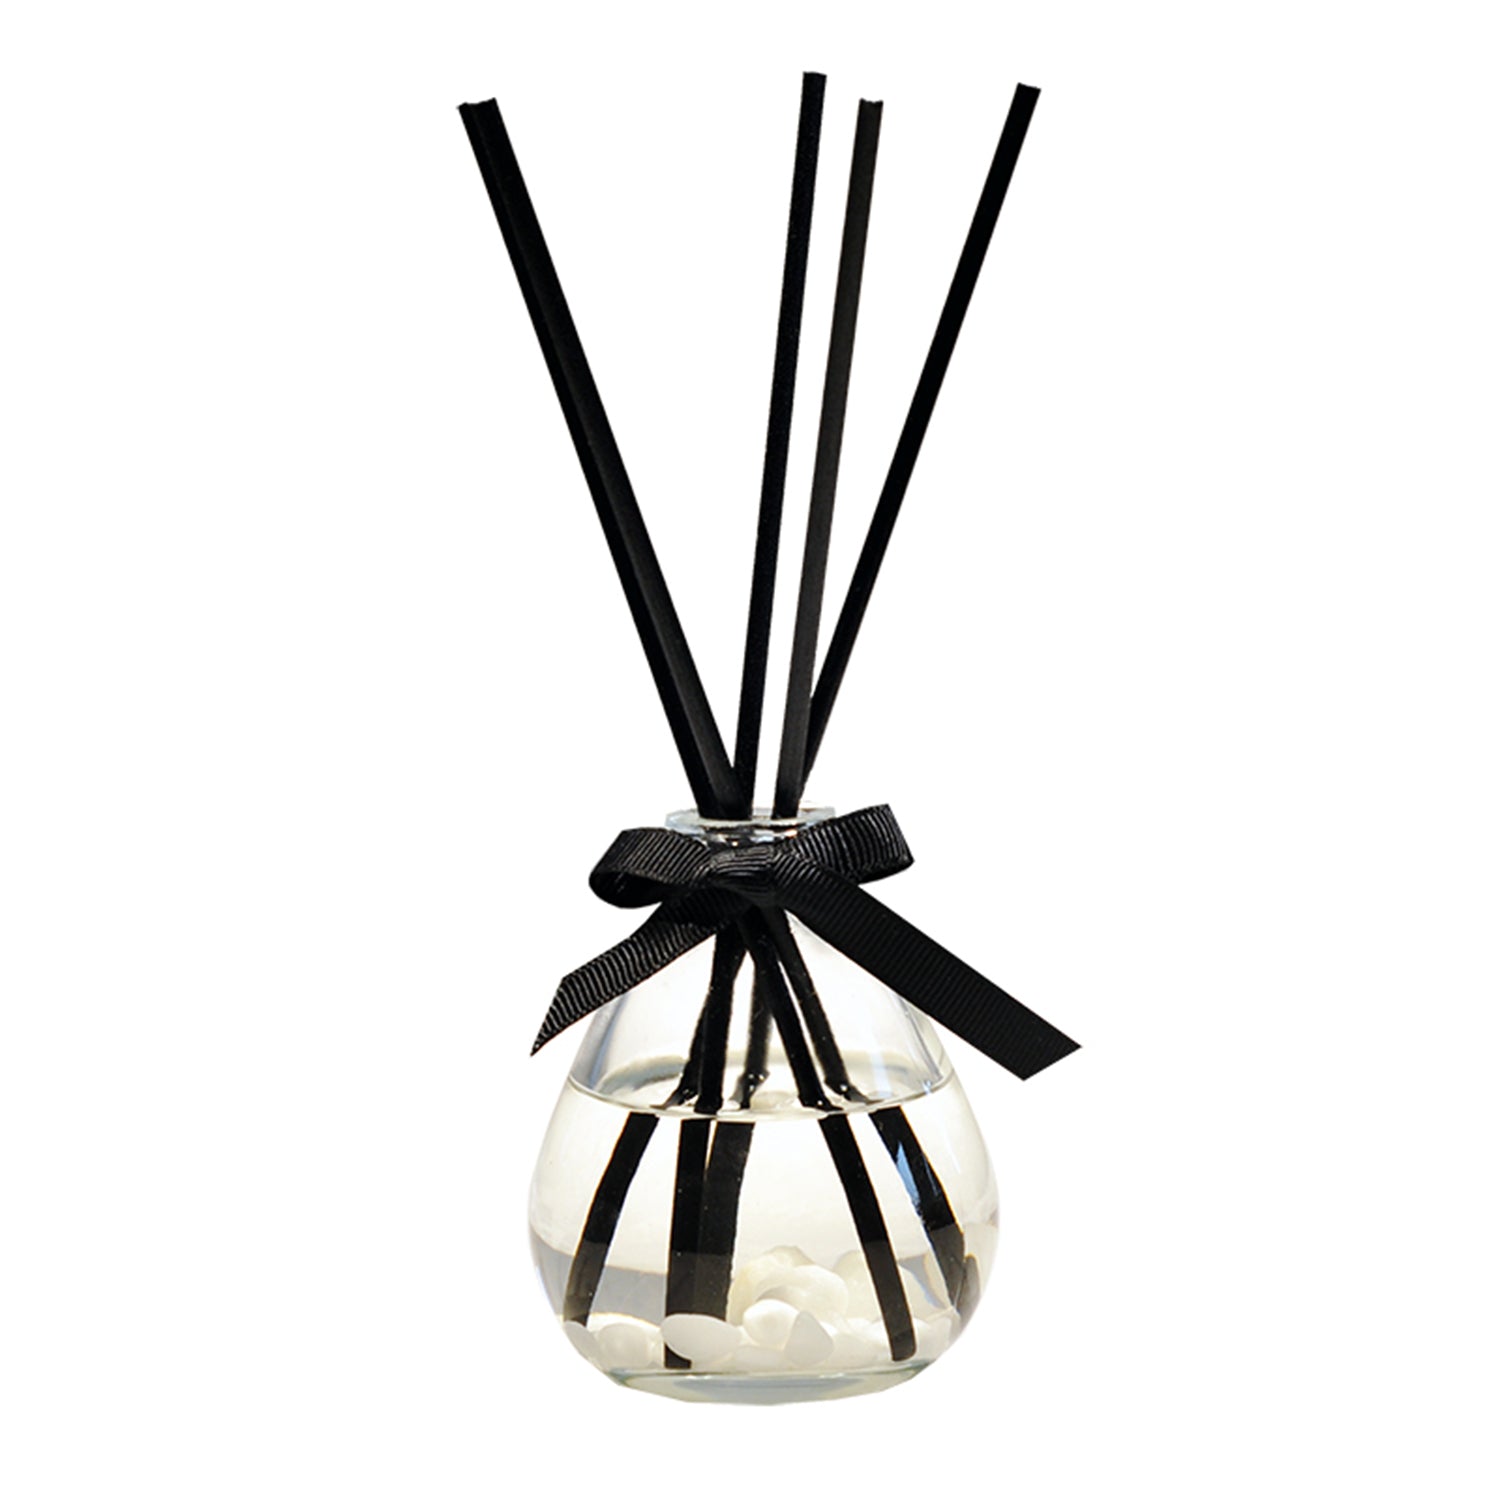 ZOLAND Reed Diffuser 100ML Premium Essential Oil Aromatherapy Mongolia Yurt Bottle with Reed Stick and Cobblestone Reed Diffuser ZOLAND Bamboo 